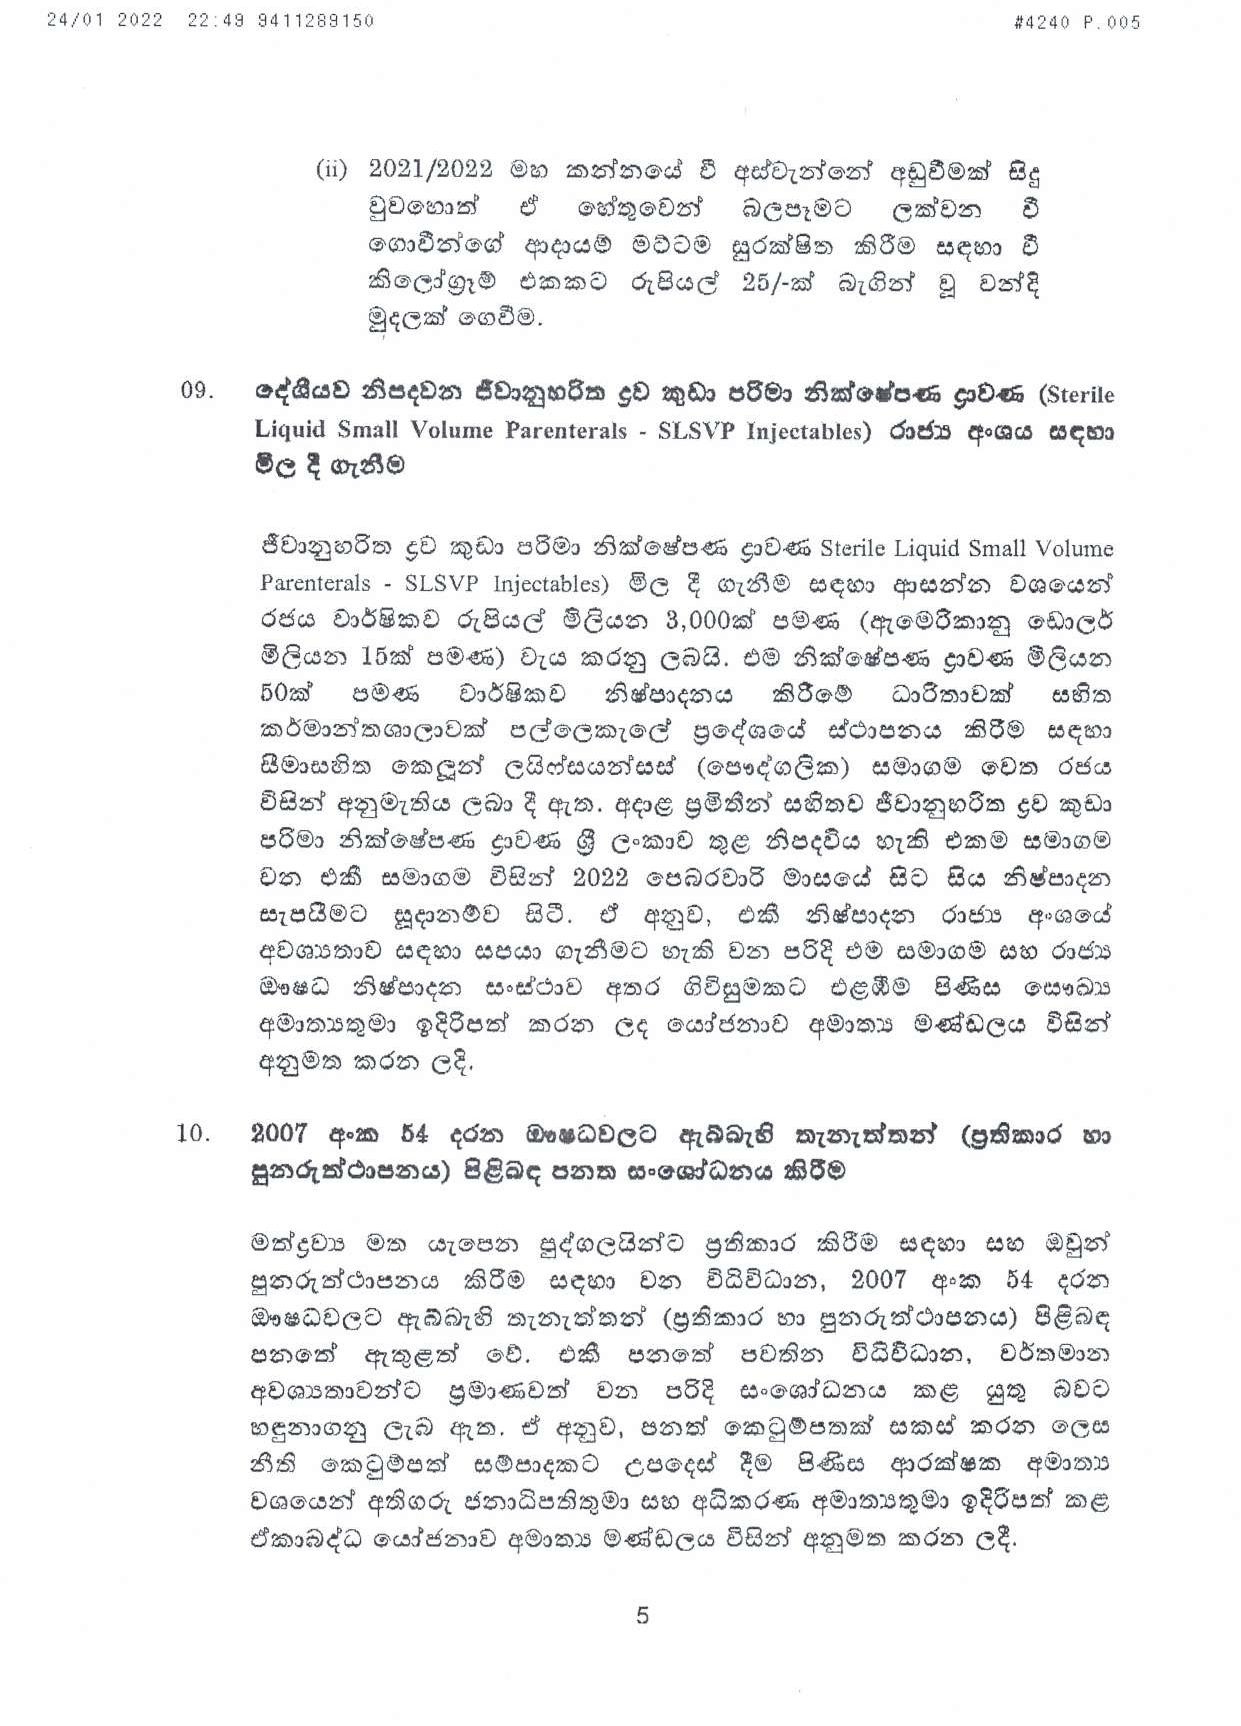 Cabinet Decision on 24.01.2022 page 001